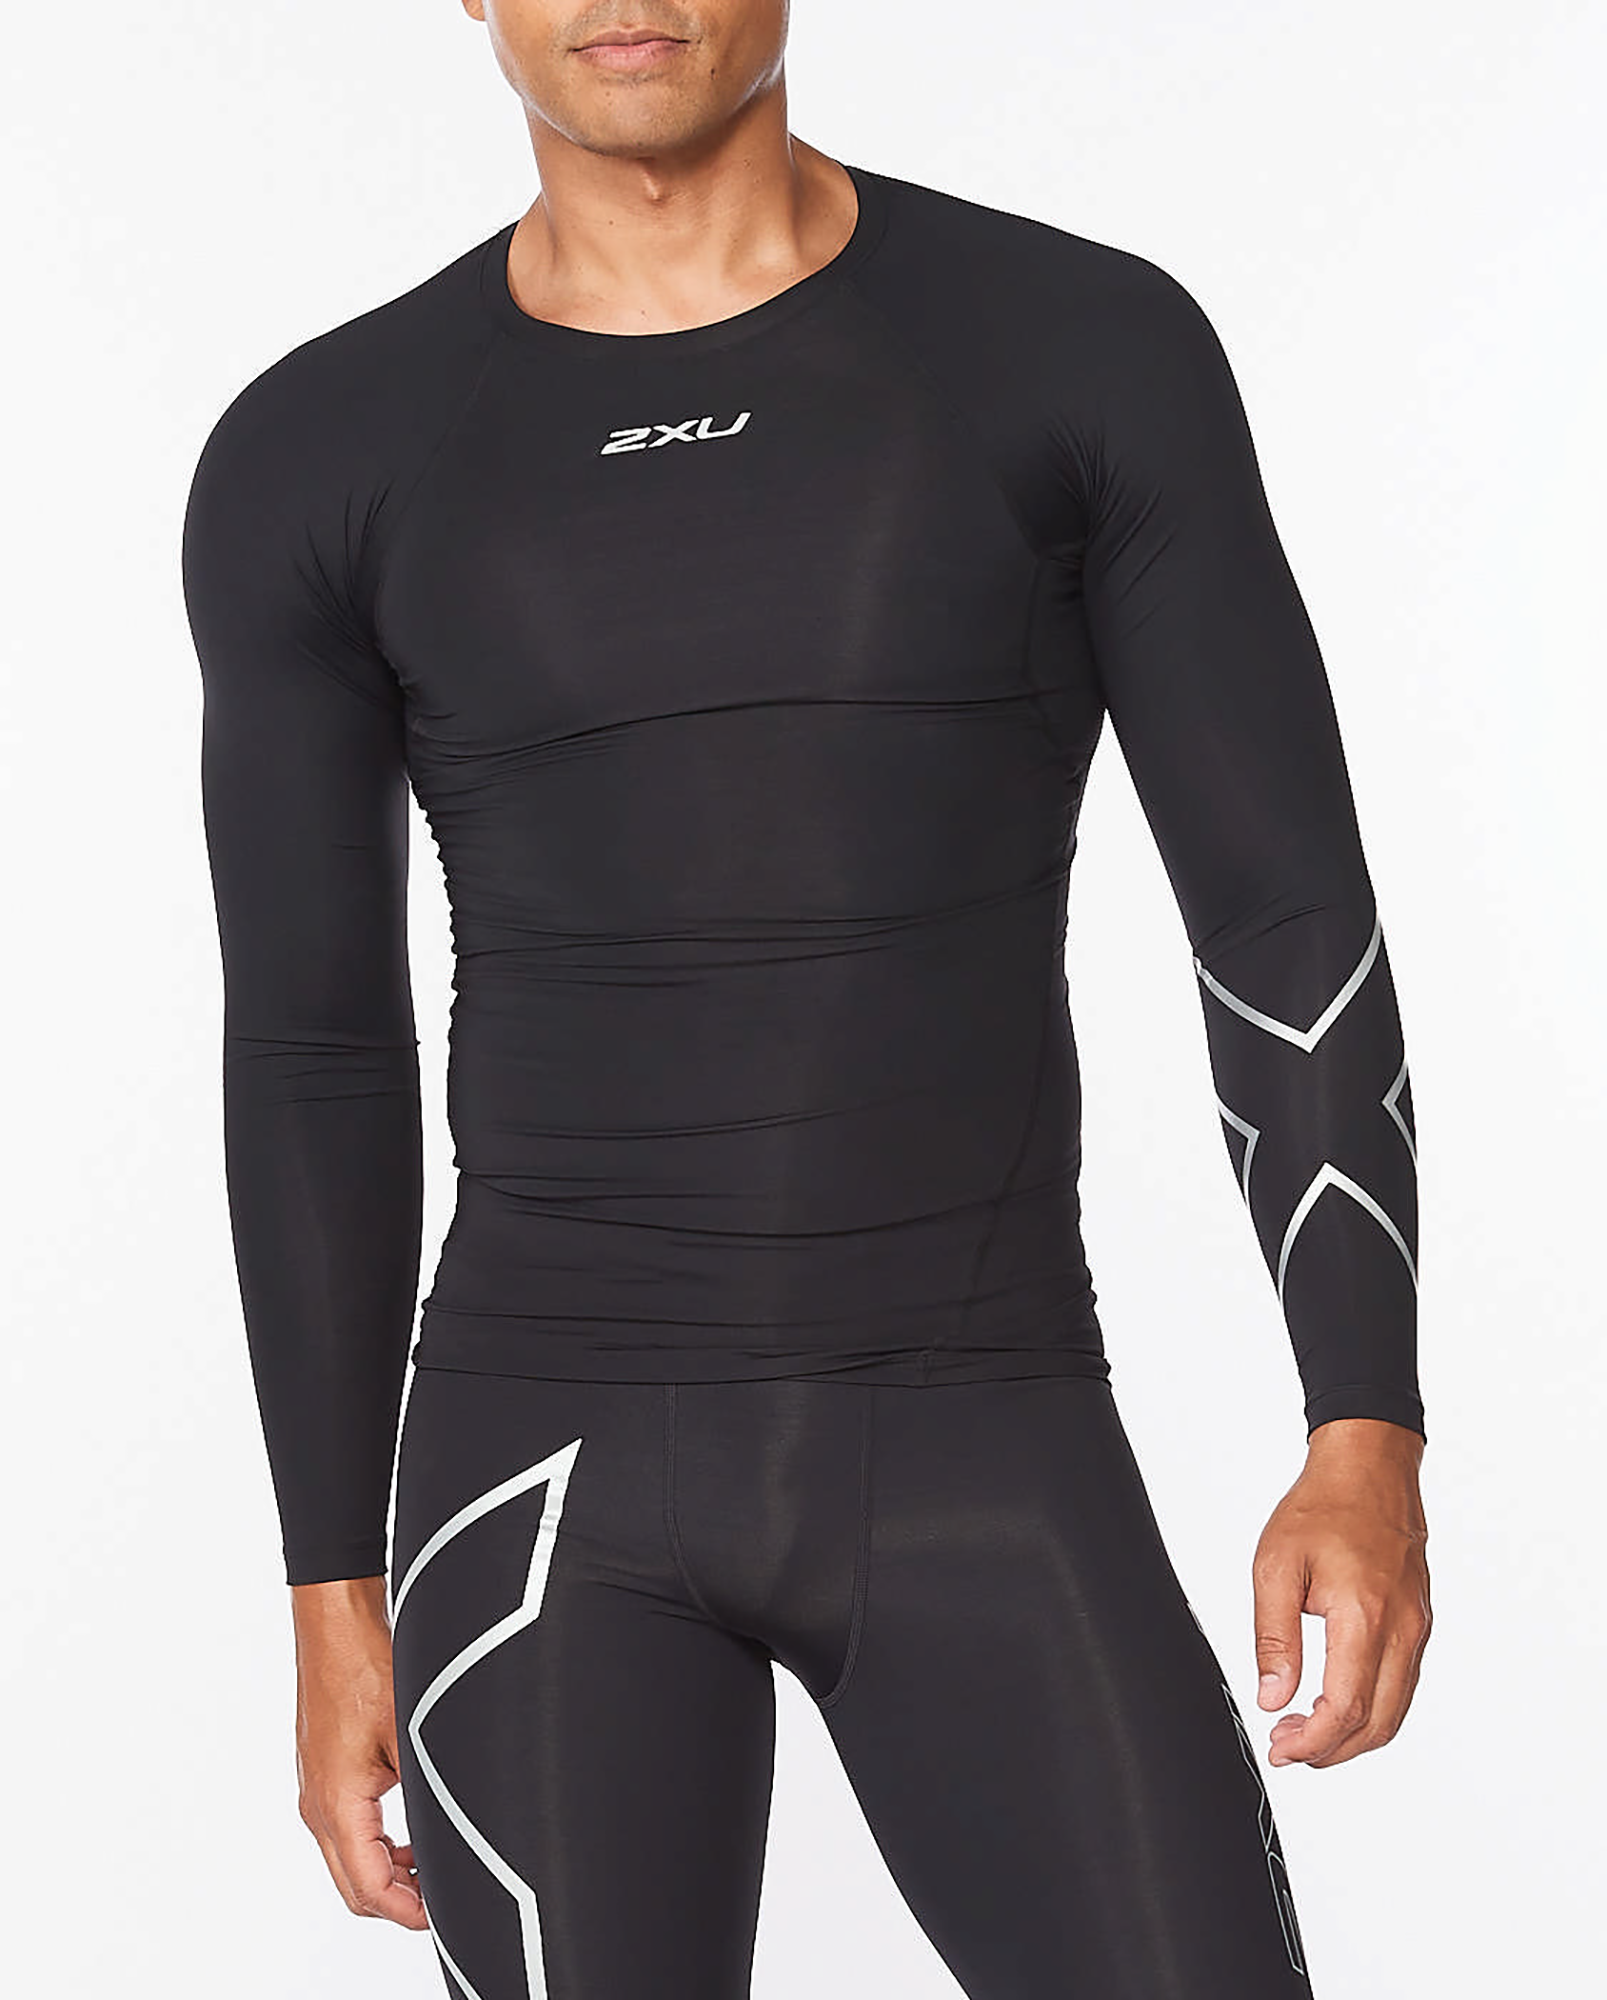 2XU Core Compression Long Sleeve Top | Champs Sports